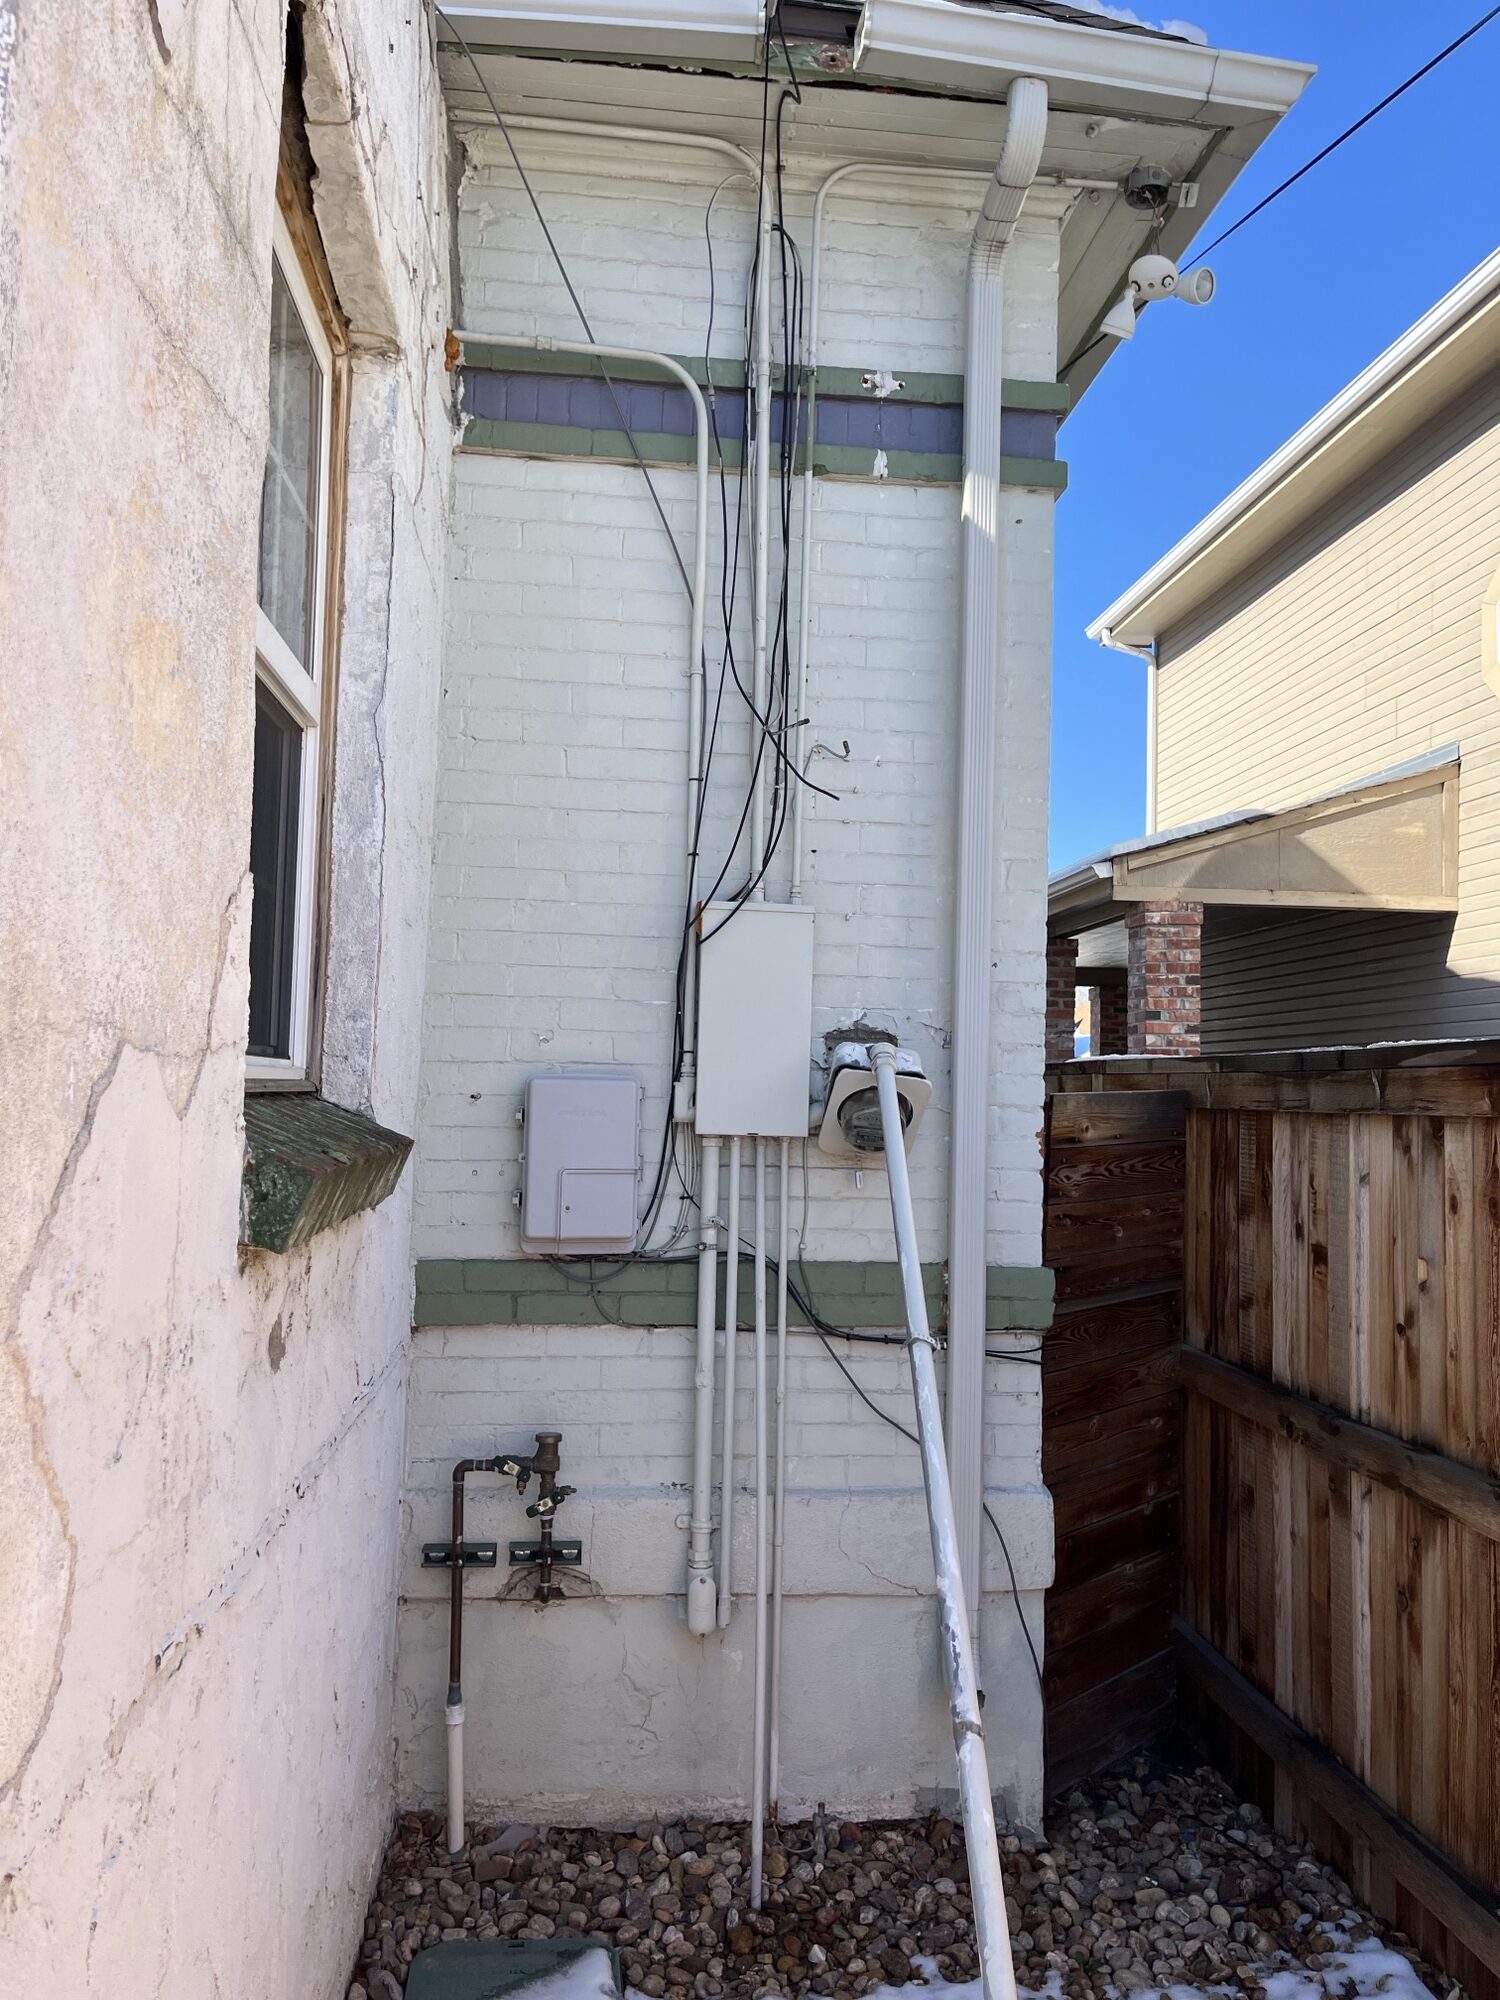 Damaged electrical panel and meter in Denver, Colorado